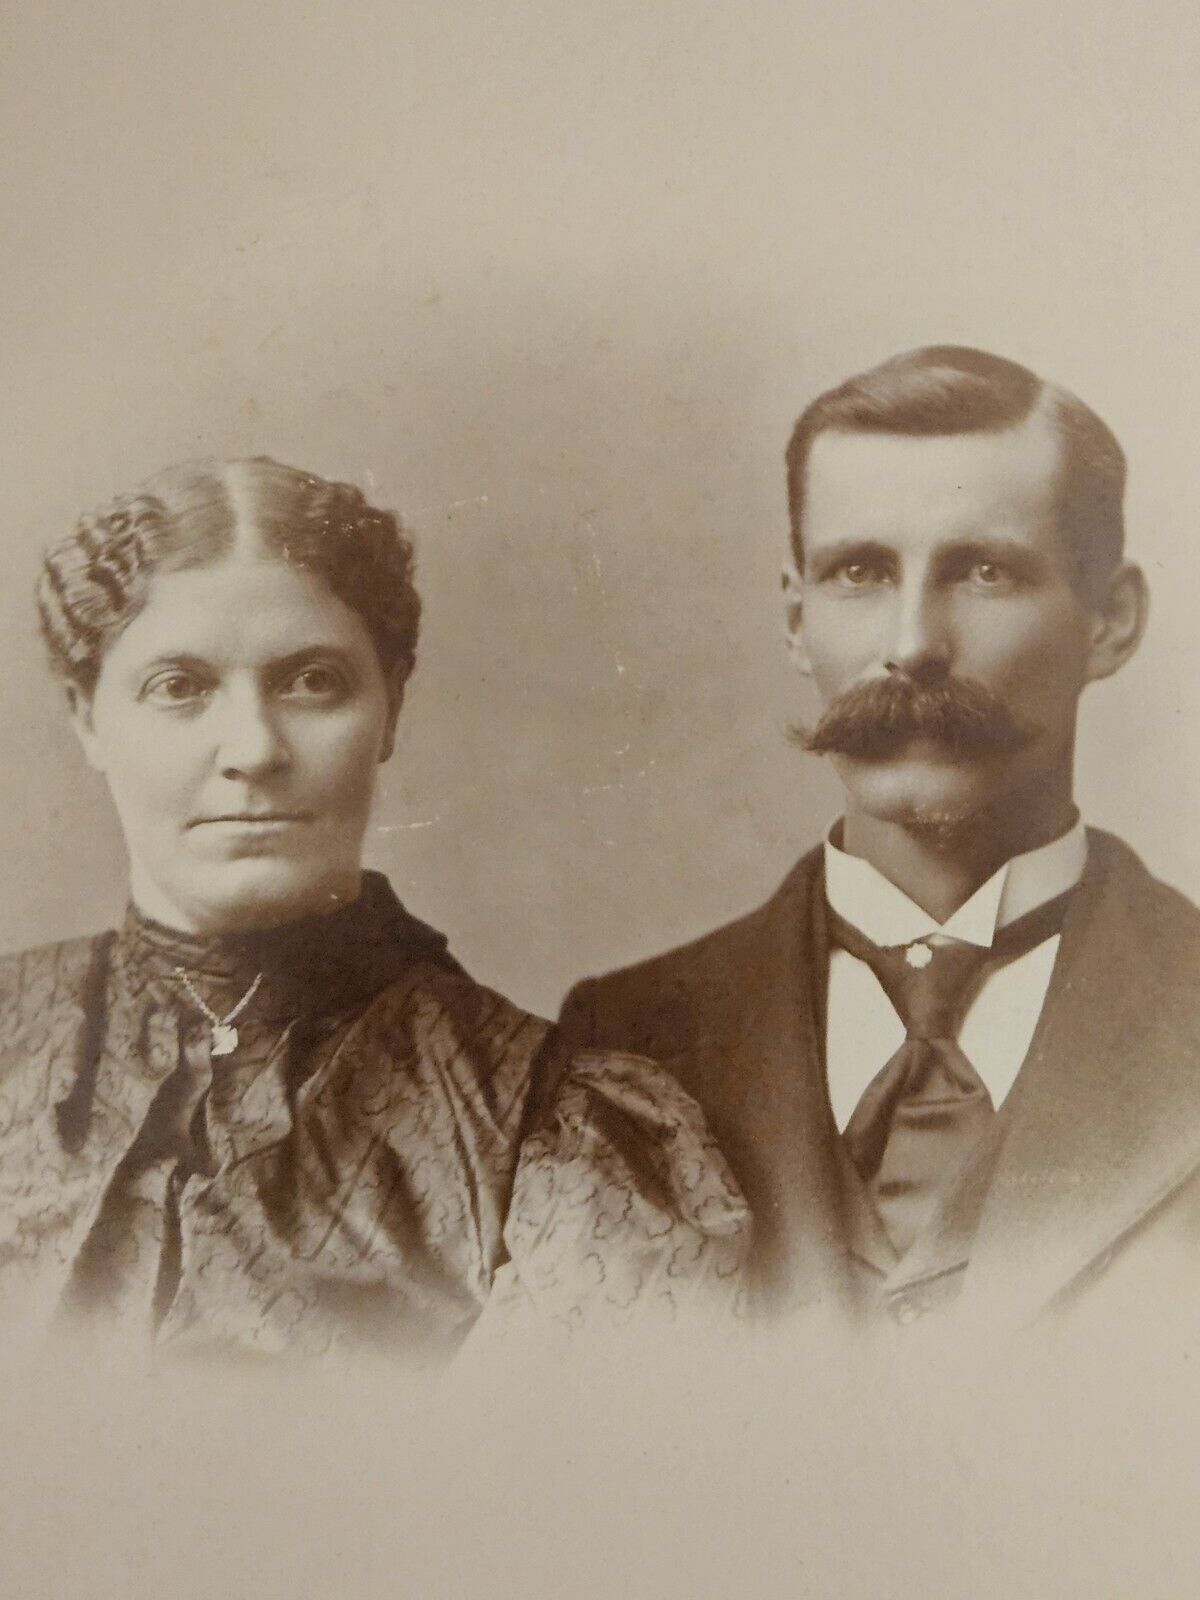 Vintage 1800's COUPLE WOOSTER OHIO CABINET CARD PHOTO. Check Out his Stache. 